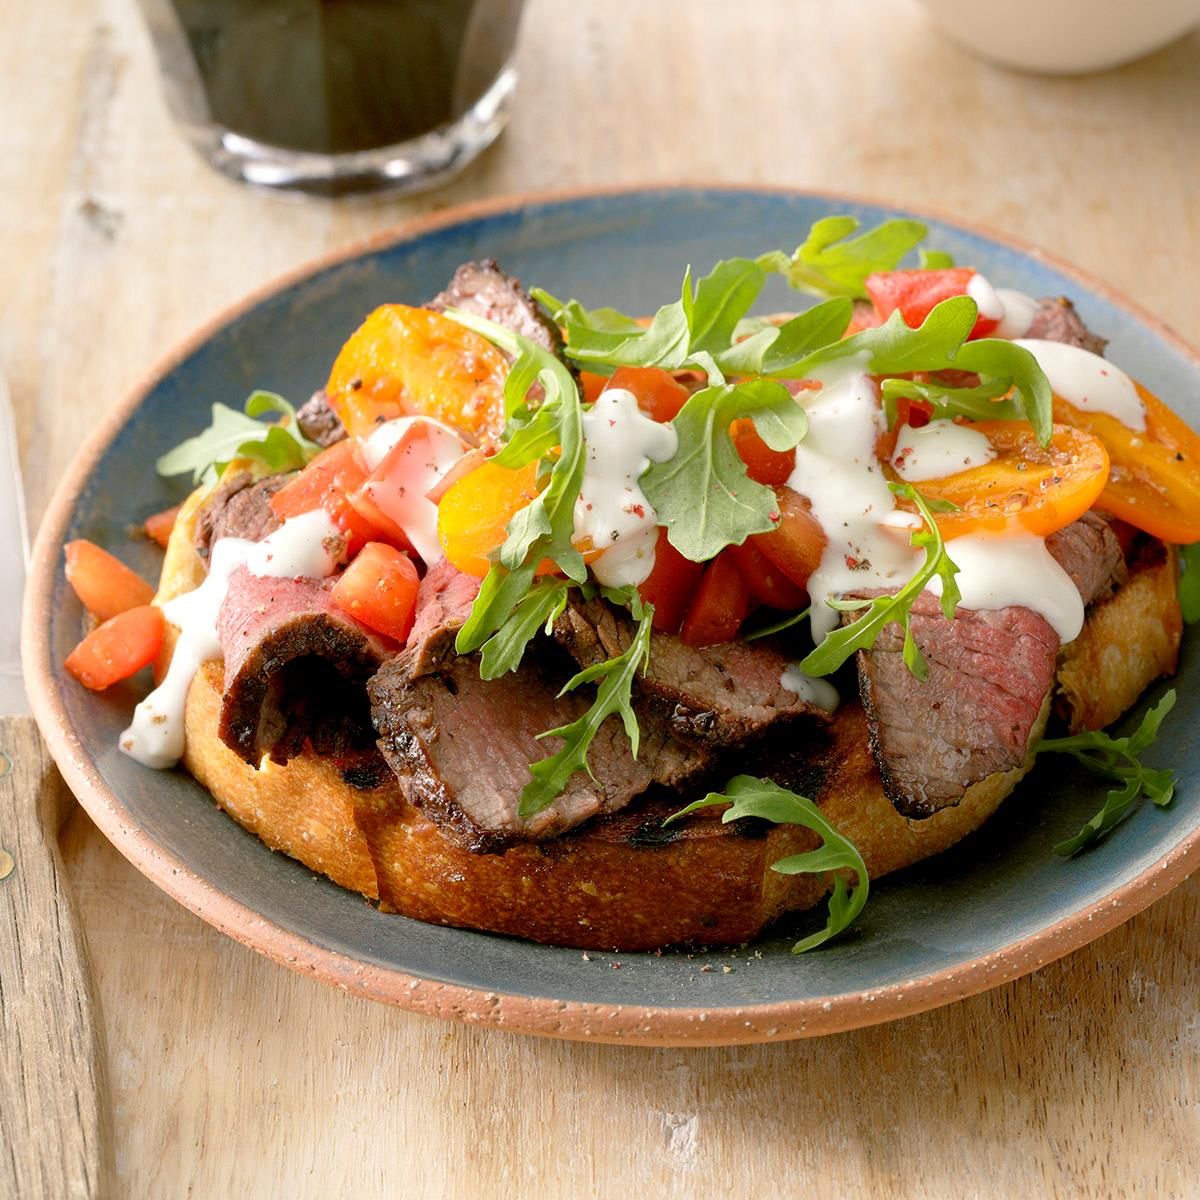 Fire up the grill for this tasty salad. The meat will be done in a snap, leaving you more time to enjoy the summer evening. —Devon Delaney, Princeton, New Jersey <a href="https://www.tasteofhome.com/recipes/grilled-steak-bruschetta-salad-for-2/">Get Recipe</a>